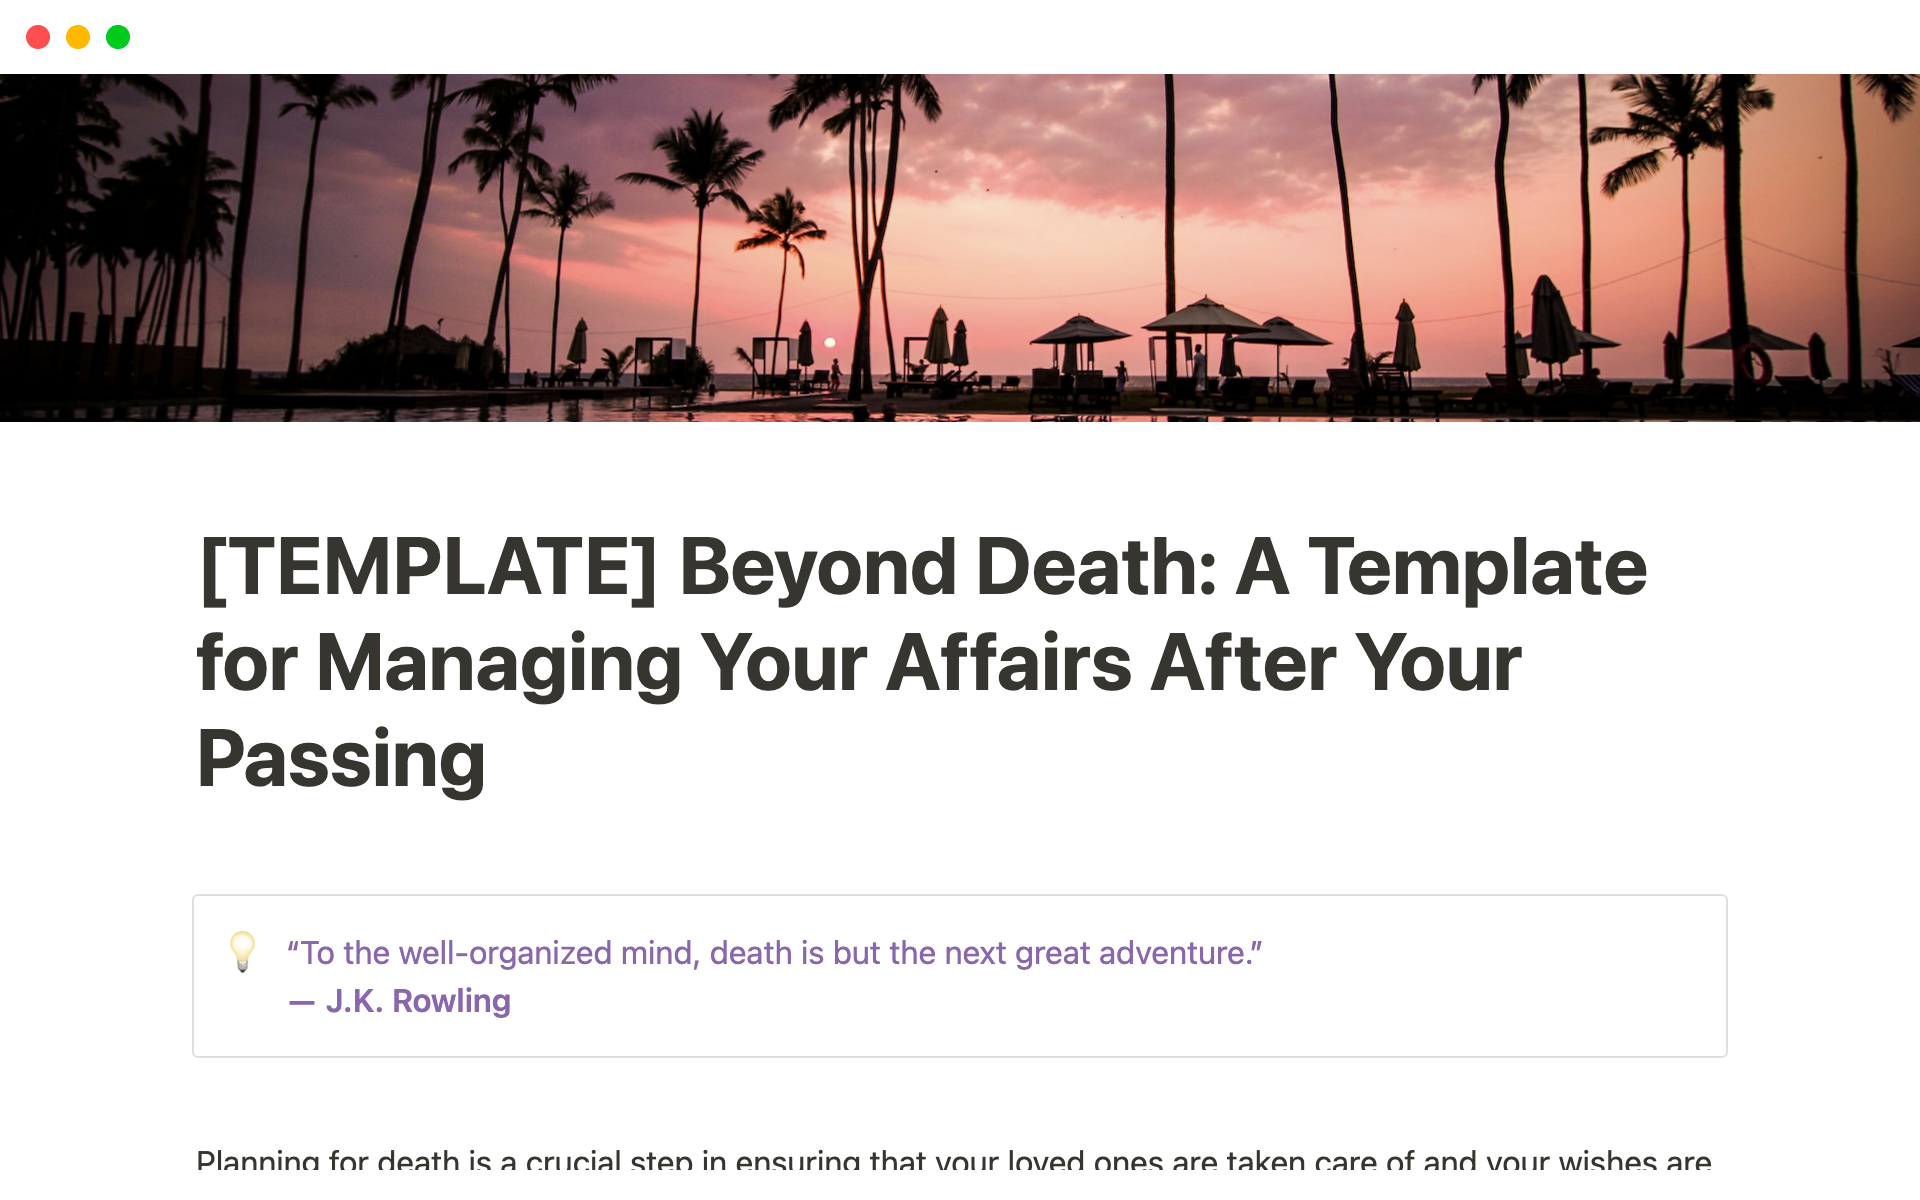 A template for managing your affairs after your passing.